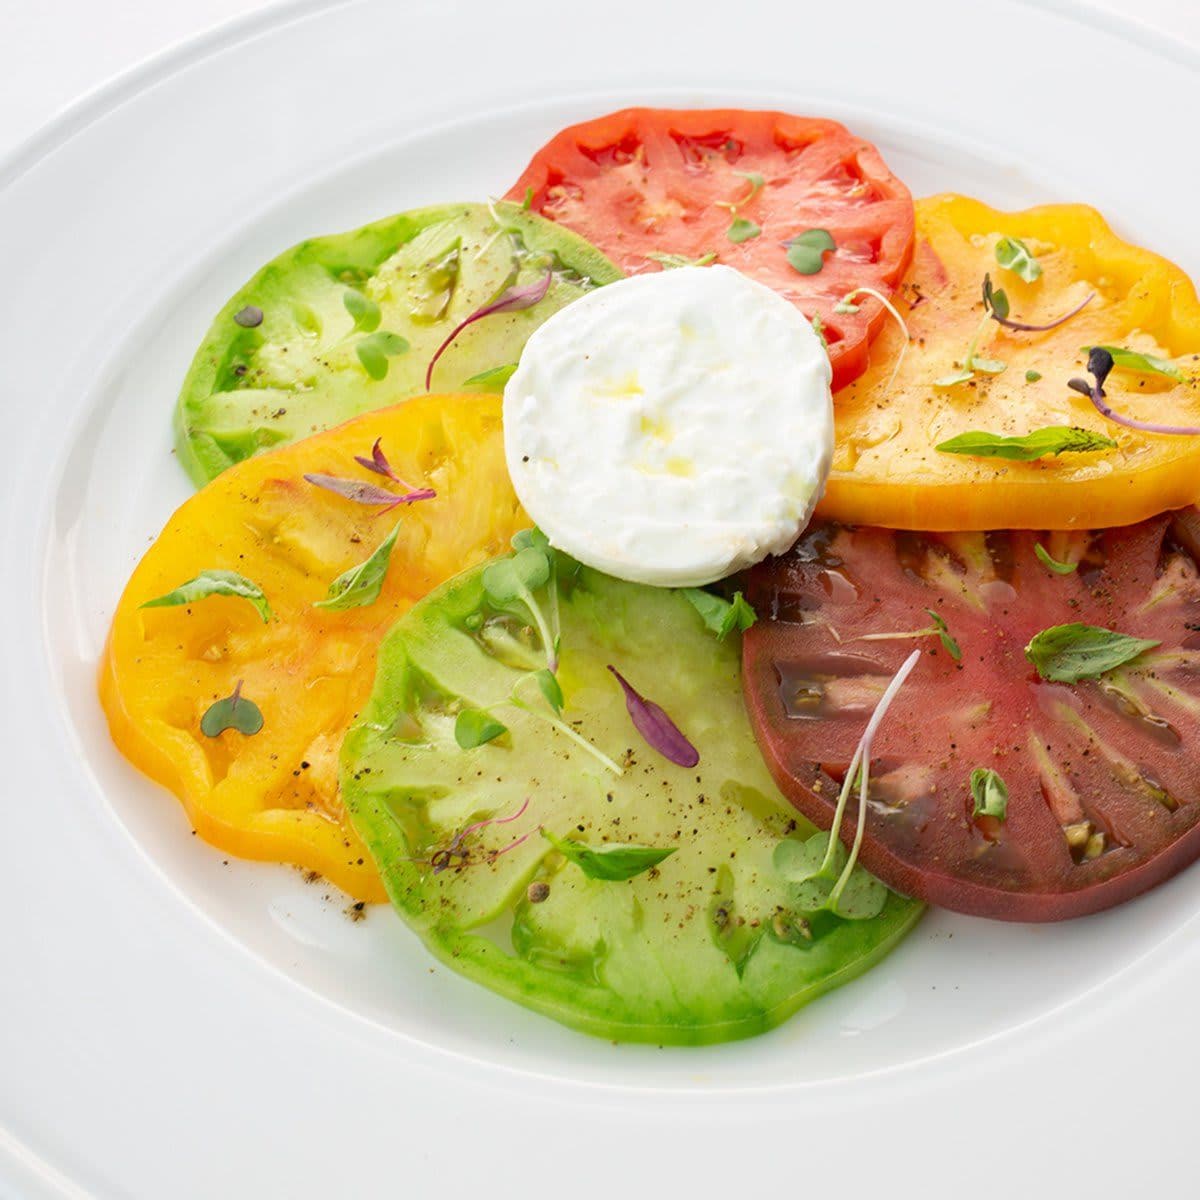 Heirloom Tomato Carpaccio From Chef Ryan McLaughlin, Executive Chef at Dexter's New Standard